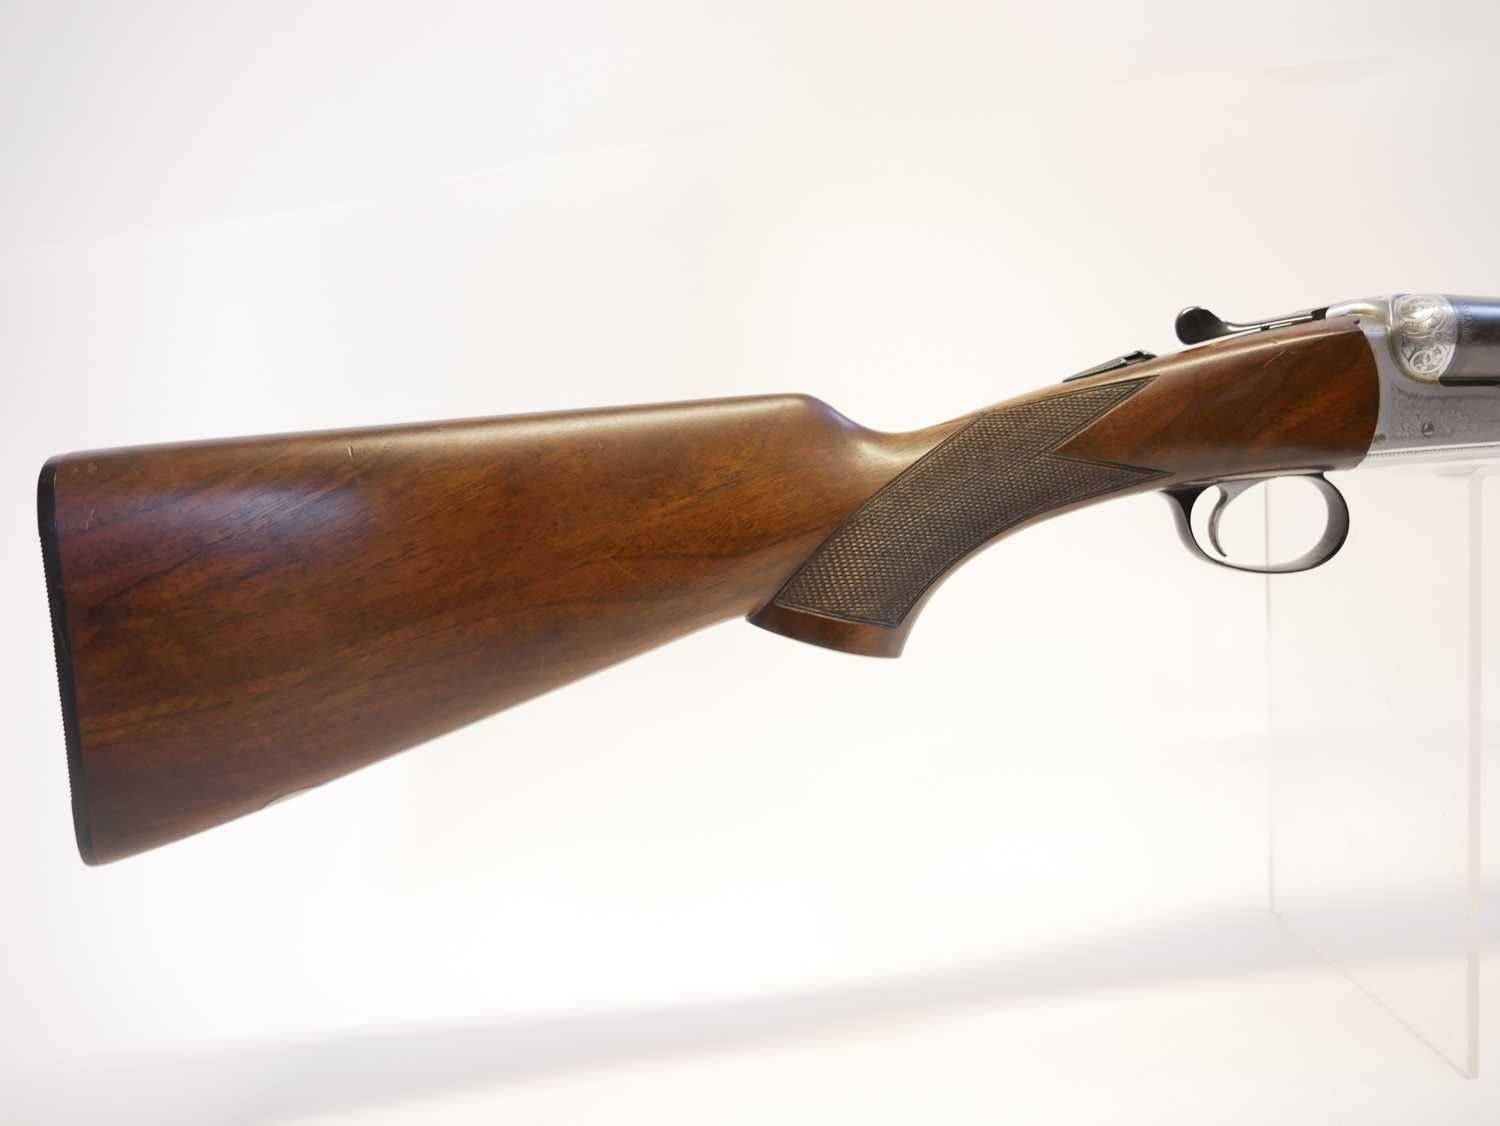 Beretta 12 bore side by side Model 626E shotgun, serial number A40366A, 28inch barrels with half and - Image 3 of 15